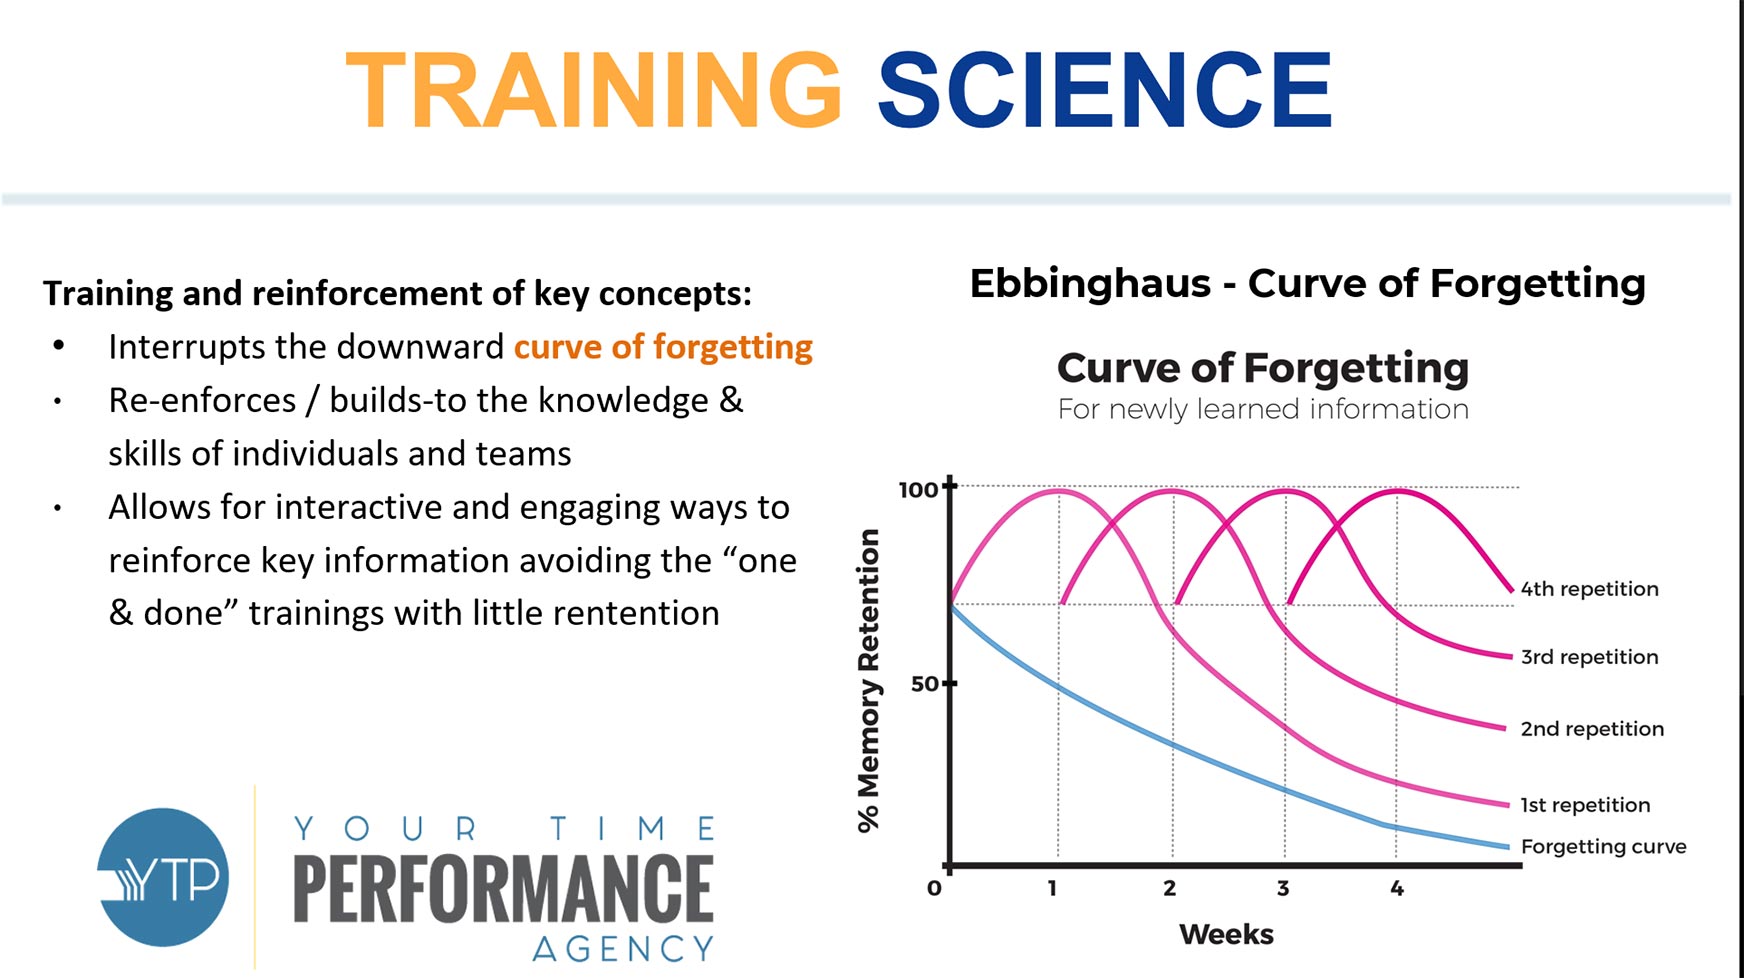 Training science - curve of forgetting